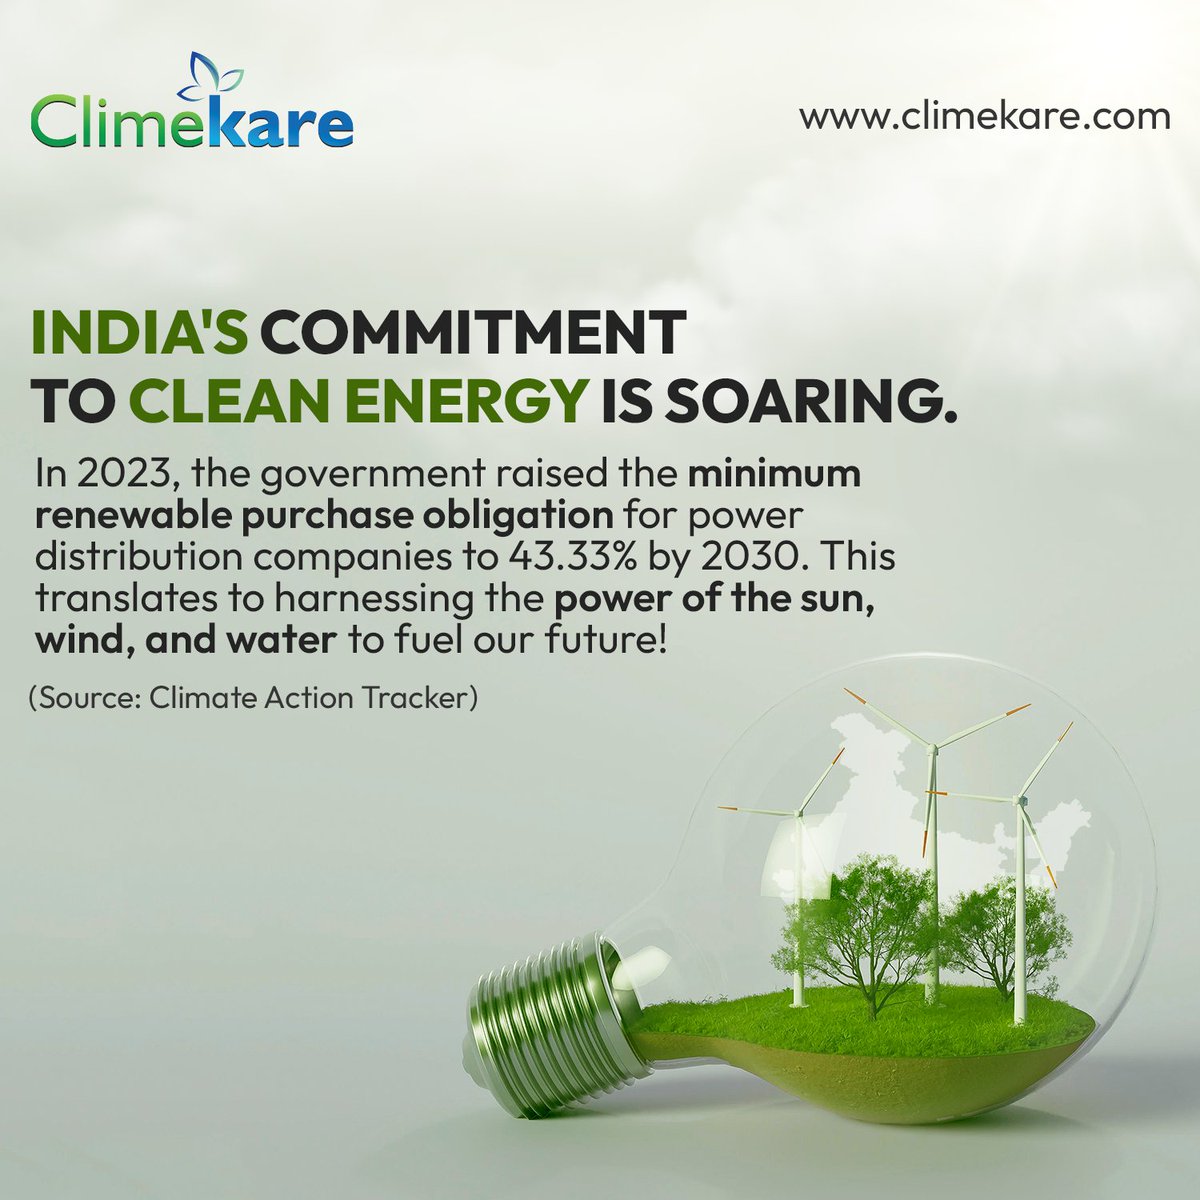 The country's commitment to renewables is skyrocketing, with a 43.33% target by 2030. Let's harness the power of nature for a brighter future. Climekare - your partner in sustainability.
.
.
.
#sustainability #climekare #carbonimpact #carbonpositive #cleanearth #greenearth